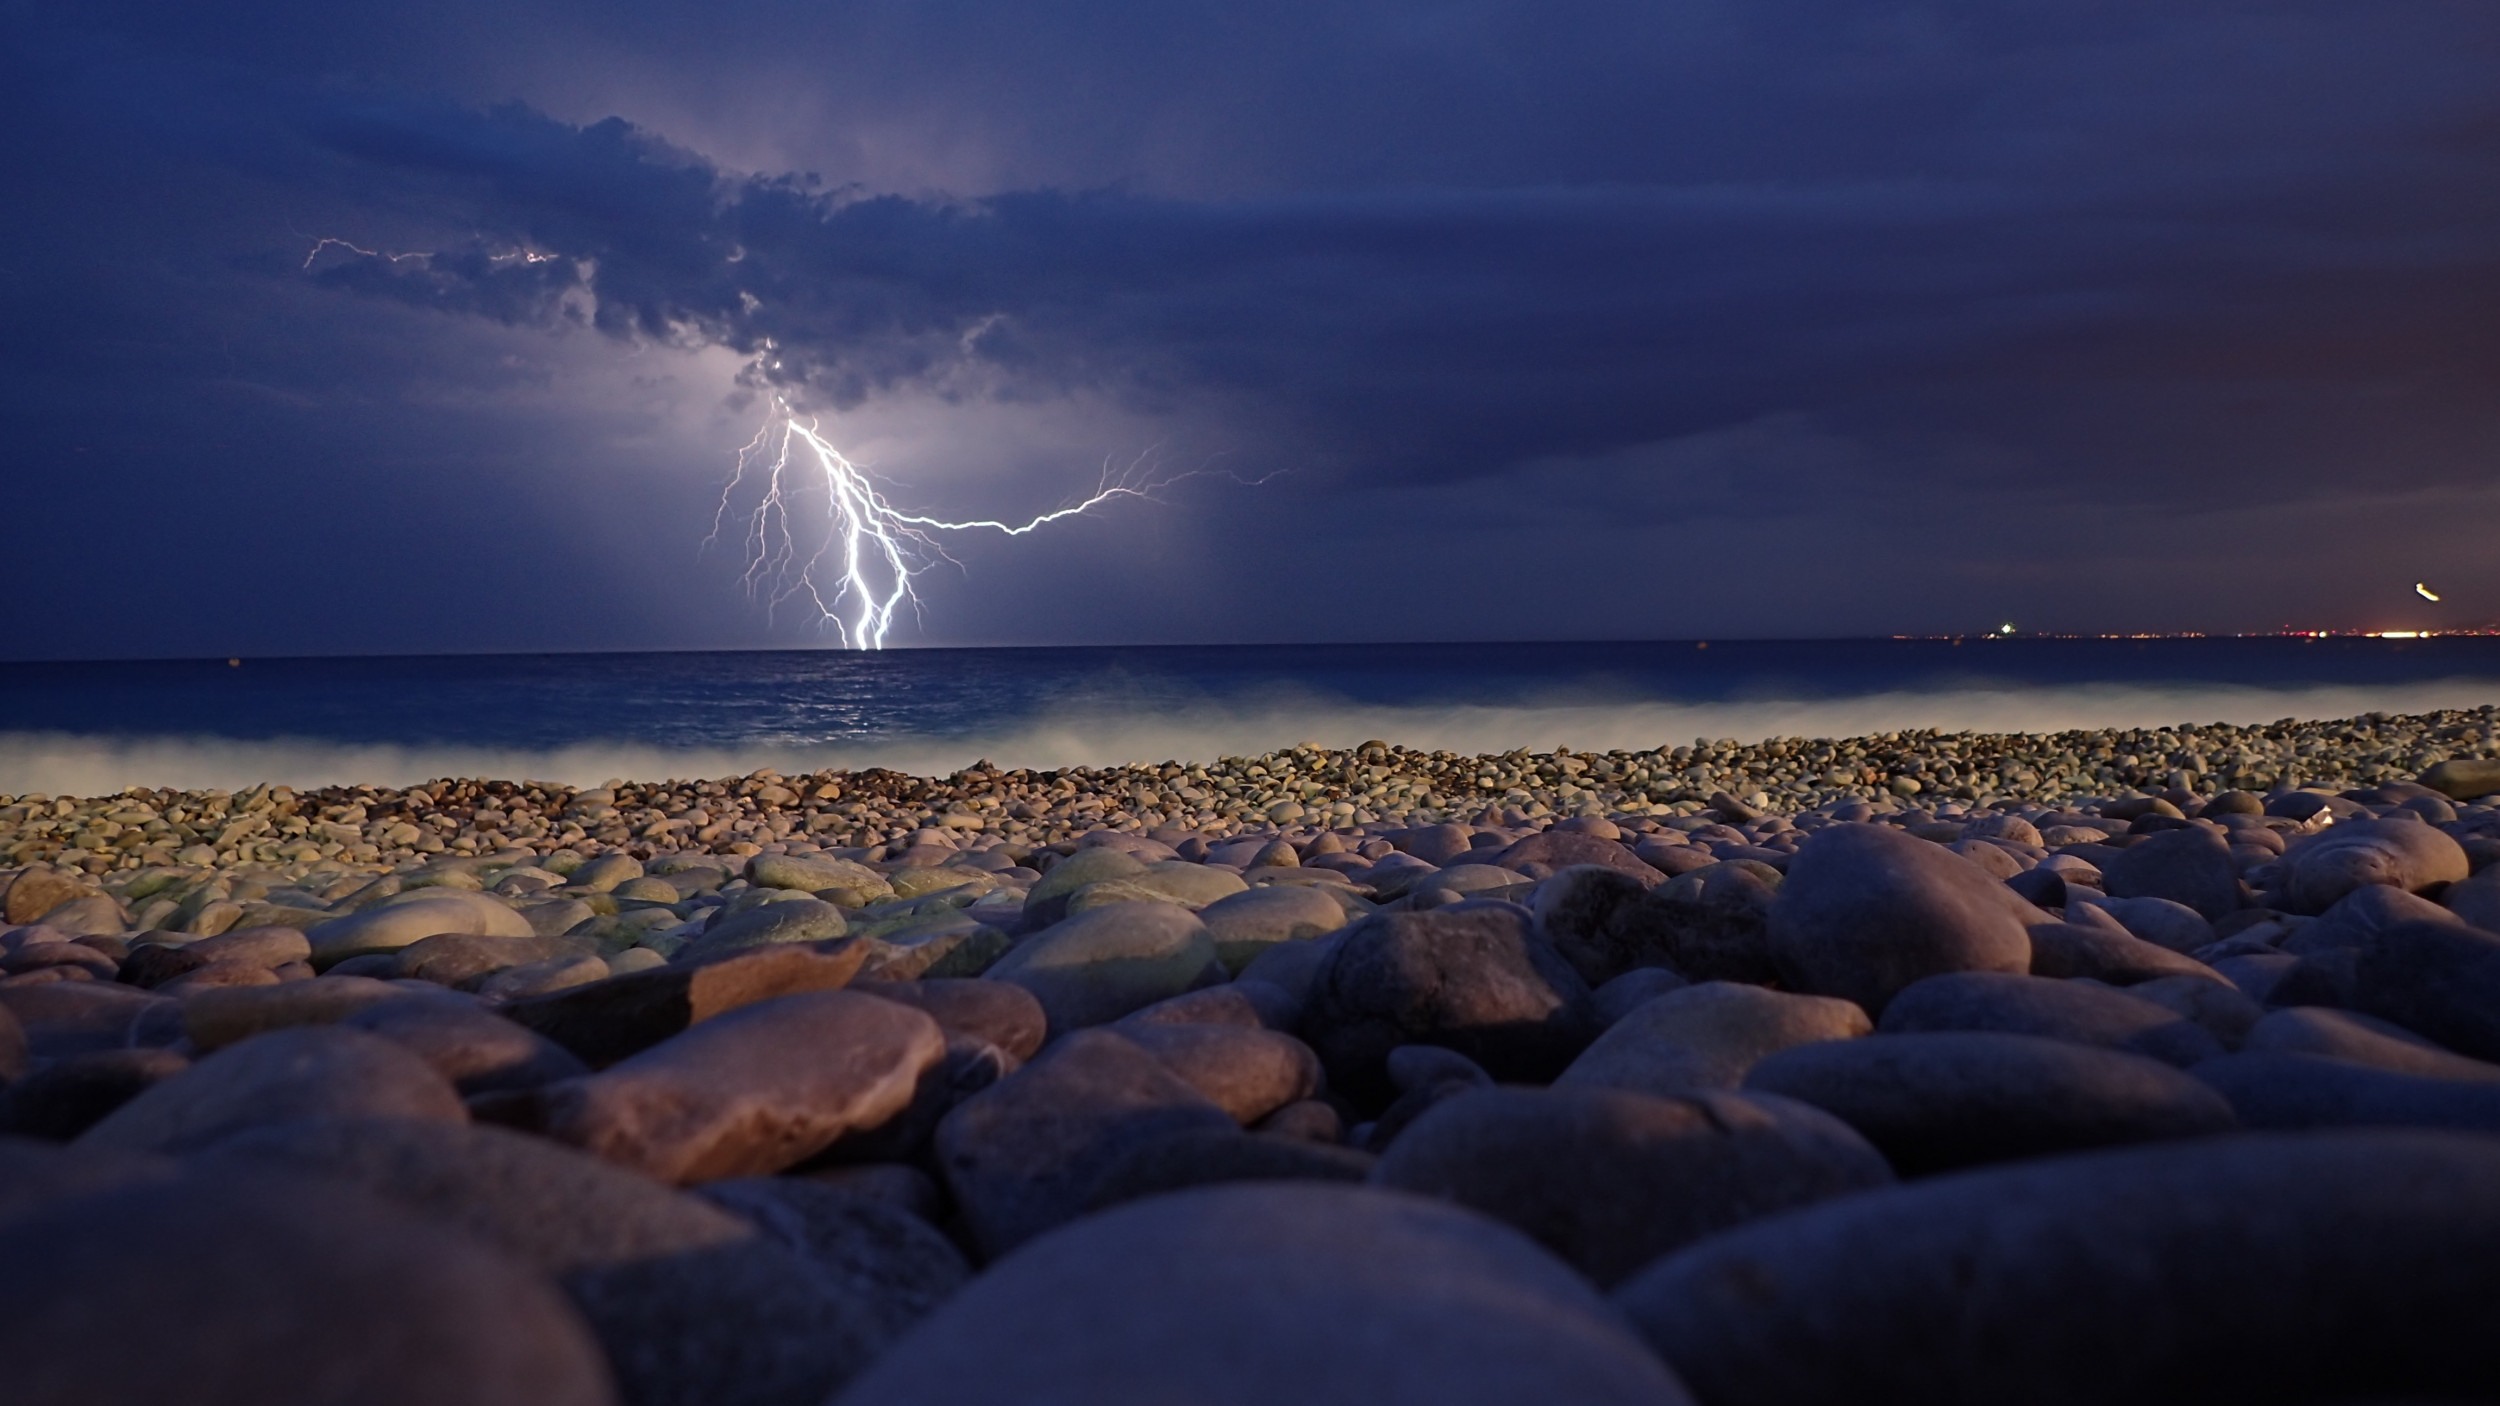 Woman and Child Struck by Lightning While Swimming in Florida